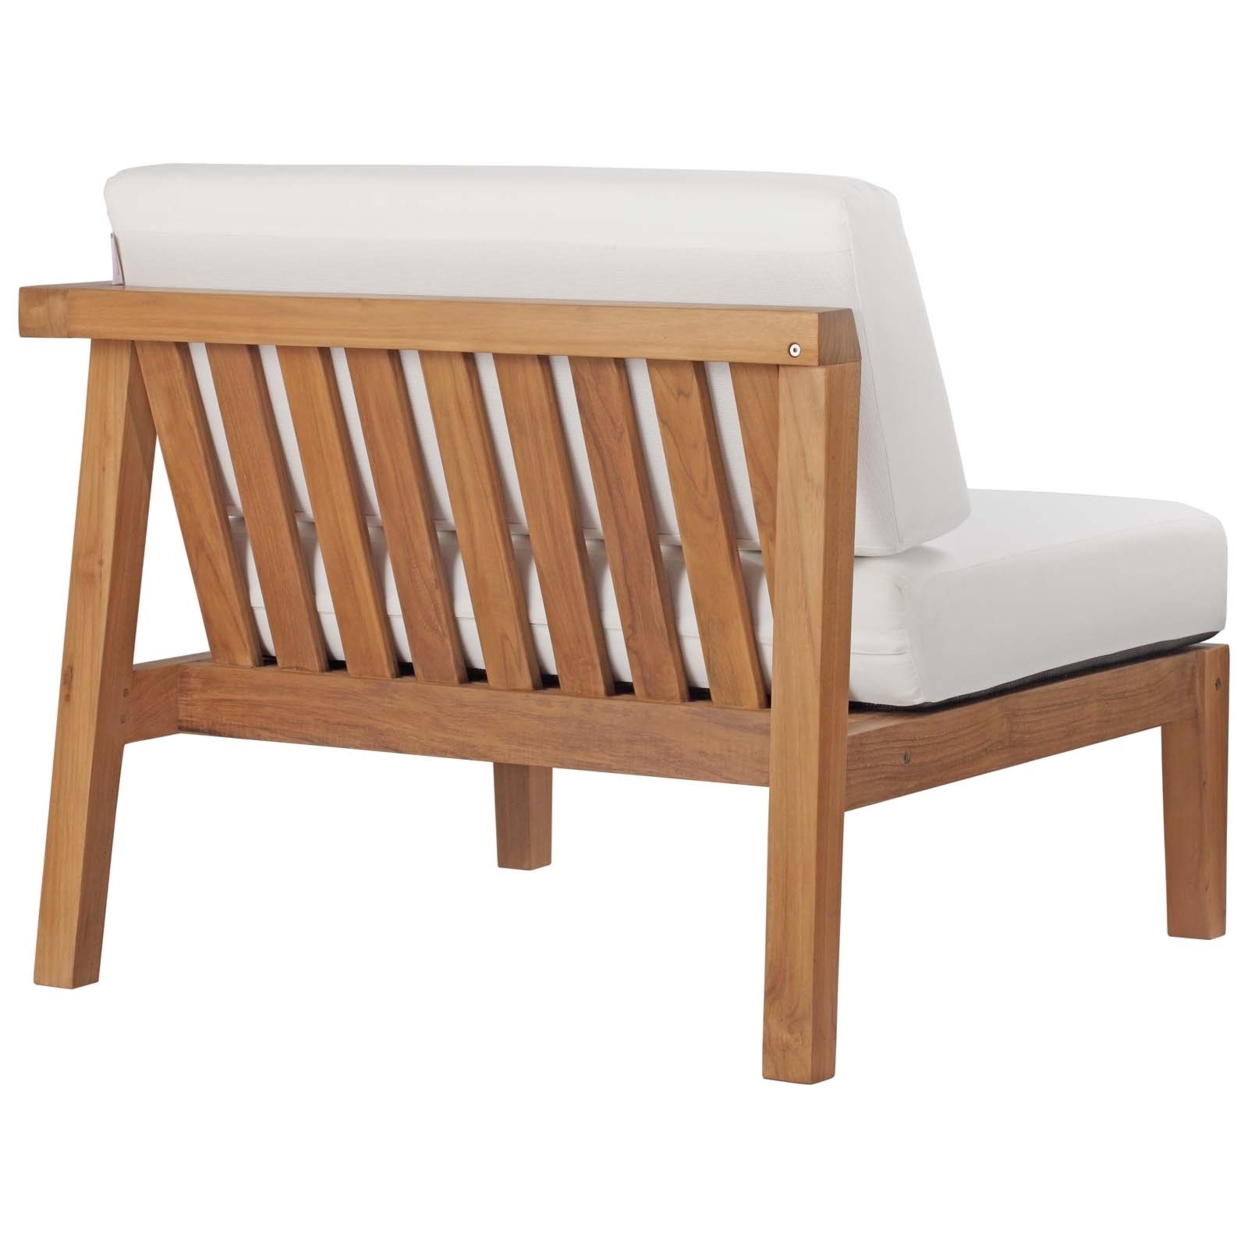 Bayport Outdoor Patio Teak Wood Right-Arm Chair, Natural White